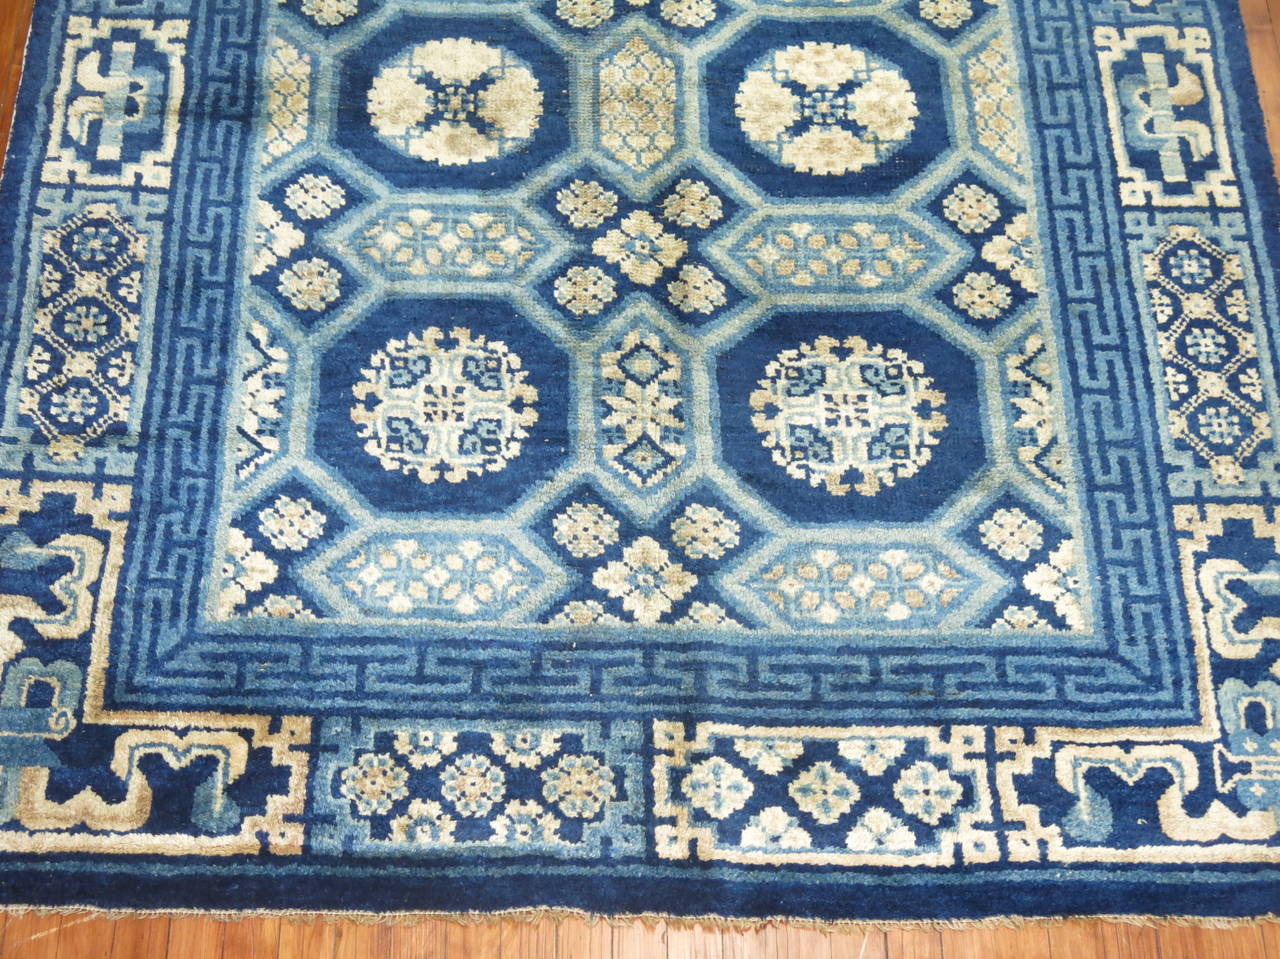 An authentic rare size antique Chinese Peking rug in blue and ivory.